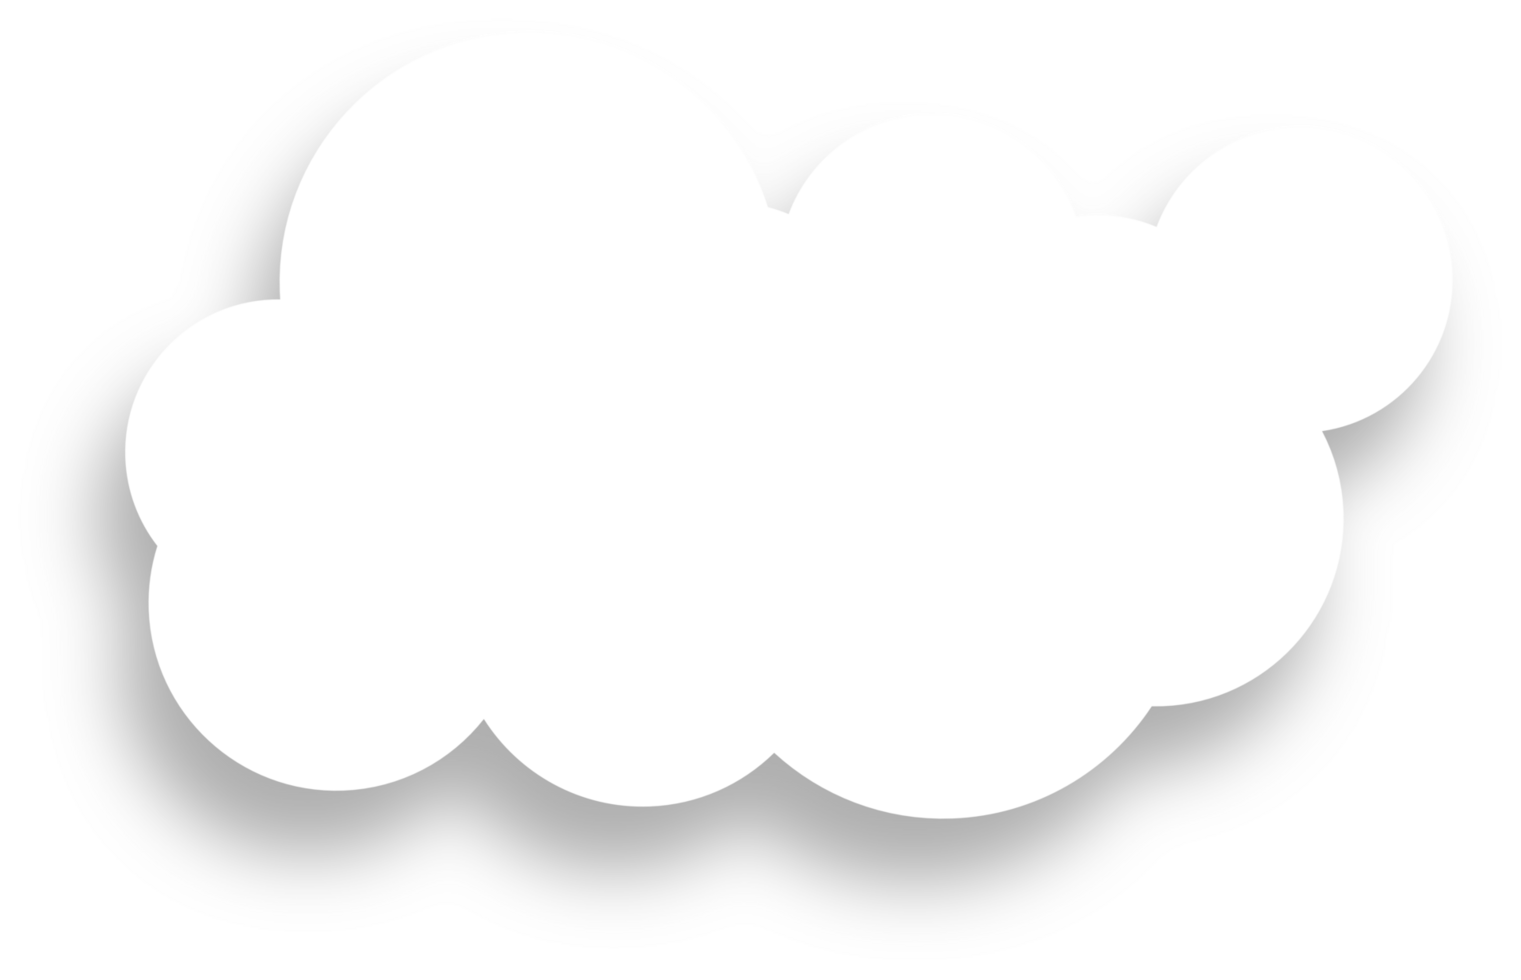 White Cloud with Shadow Design Element png